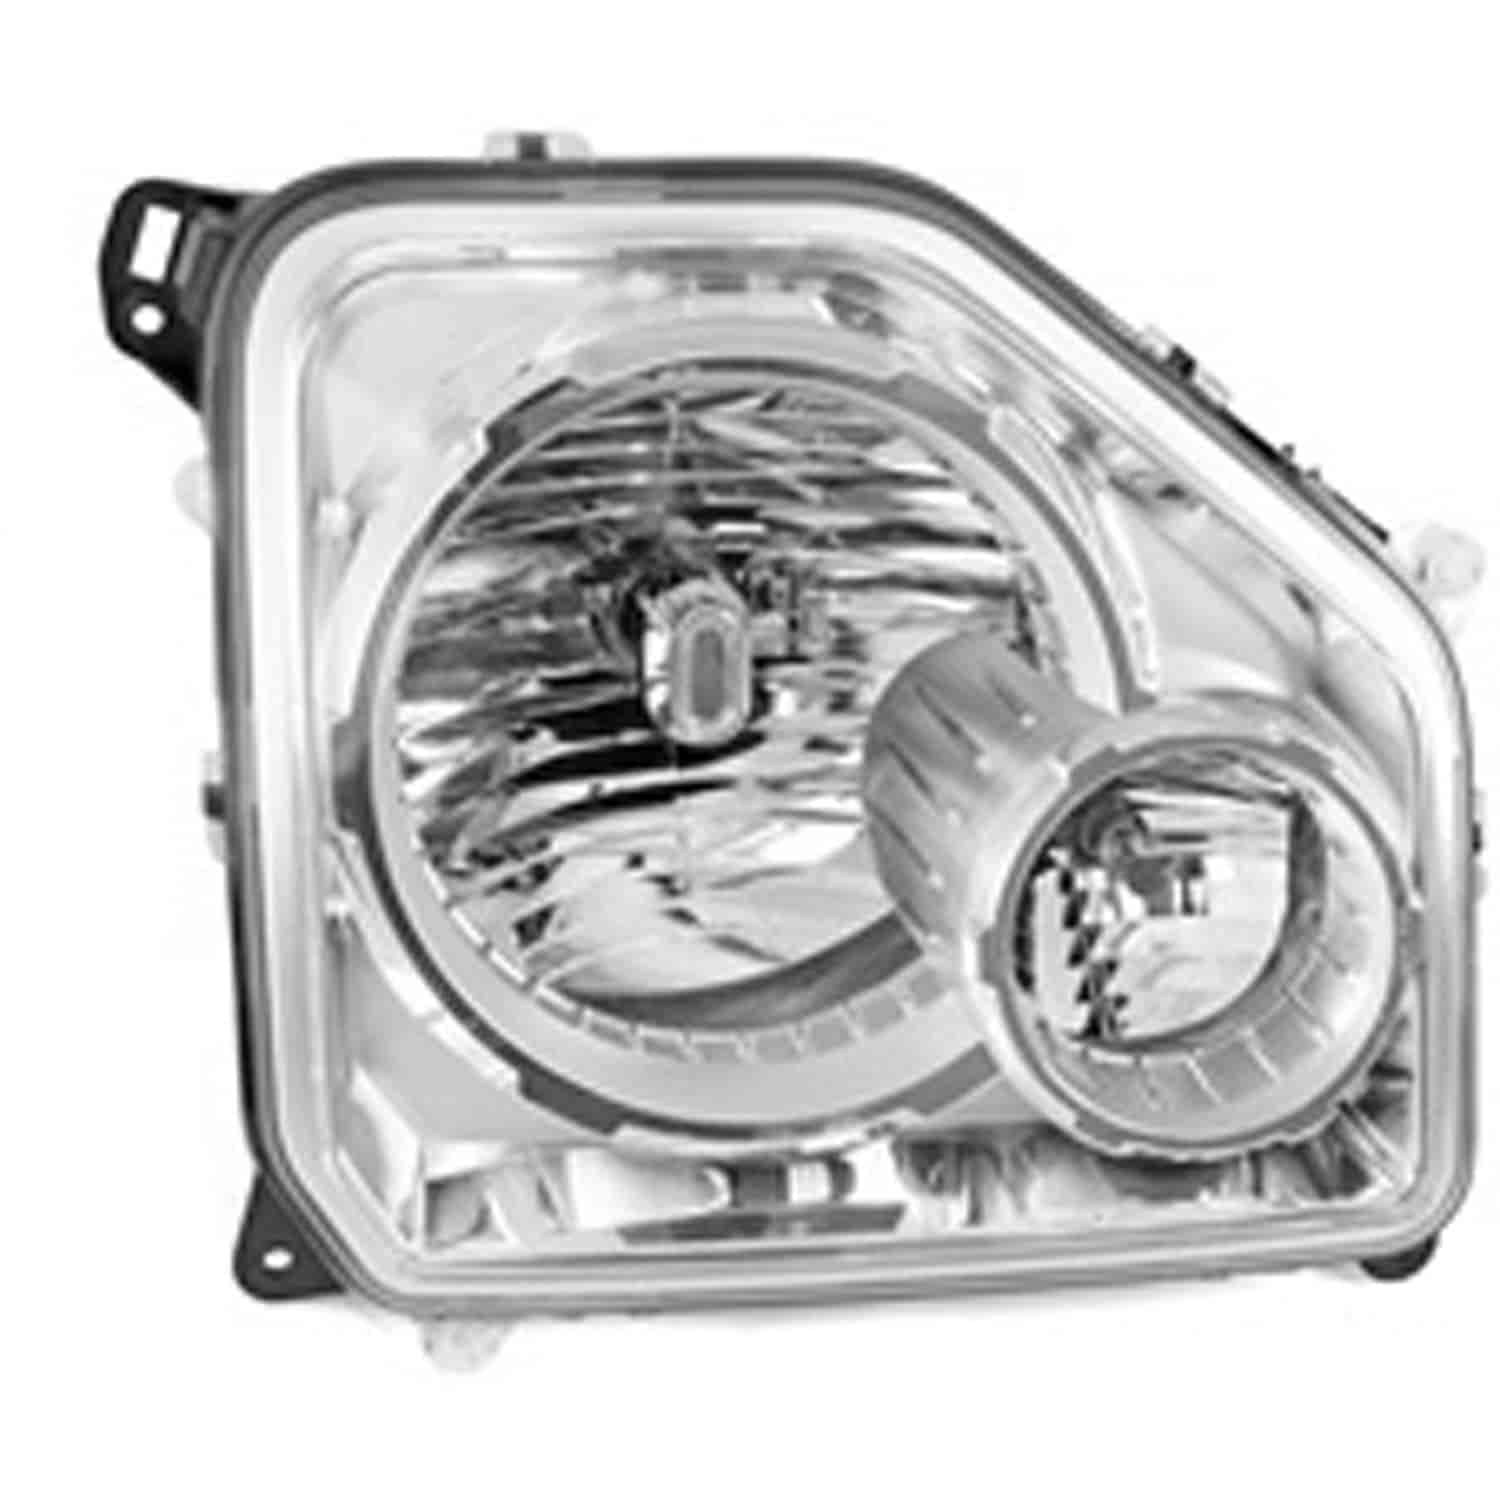 Replacement headlight assembly from Omix-ADA, Fits left side of 08-10 Jeep Liberty KKs.